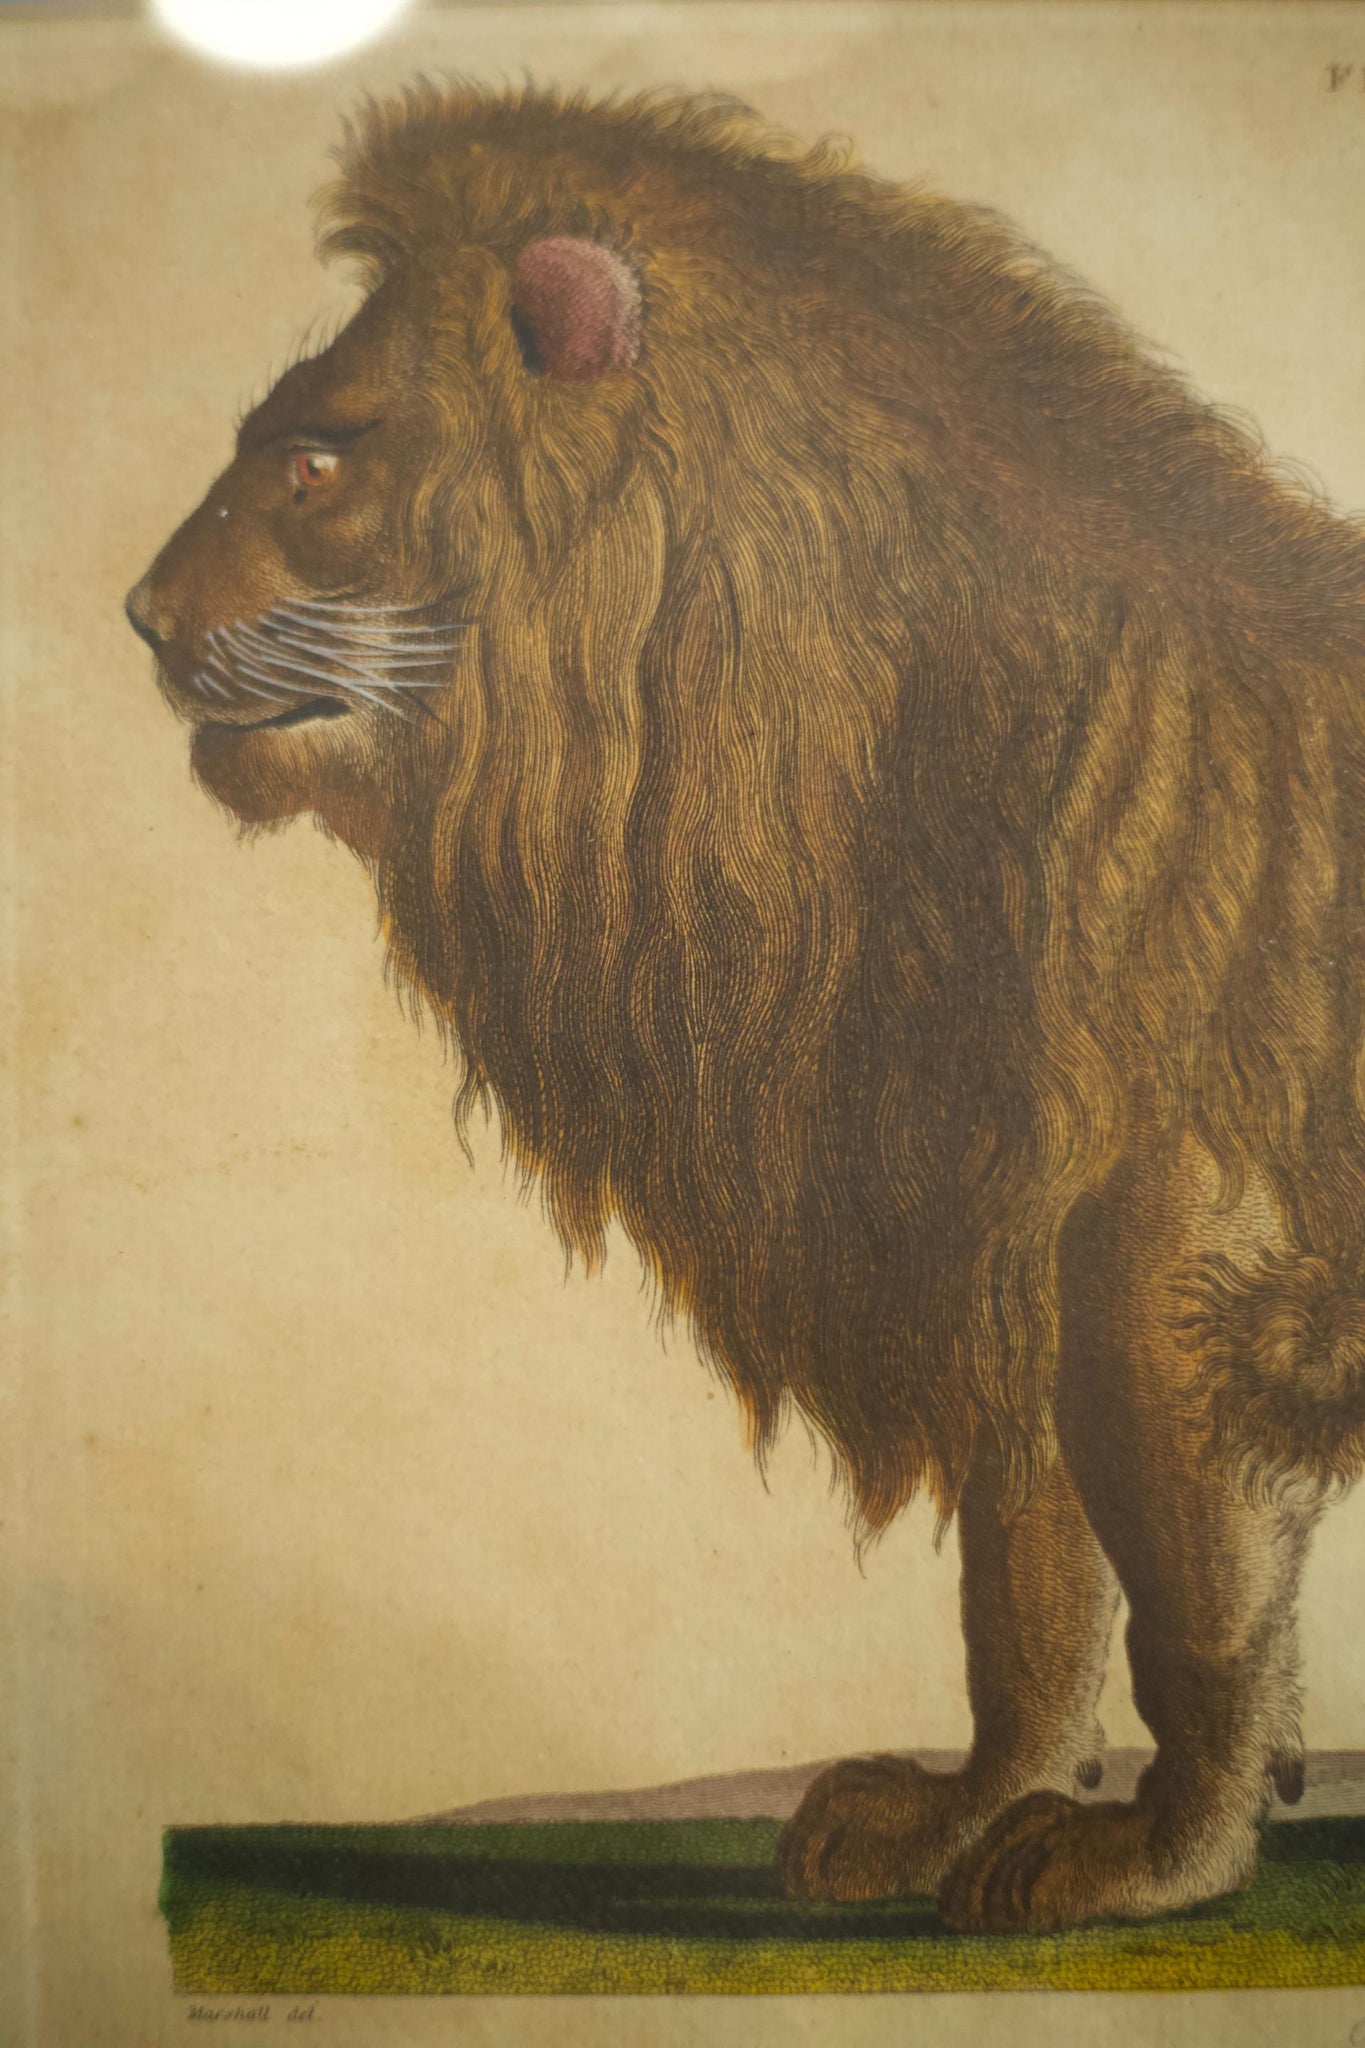 18th century book plate of a lion